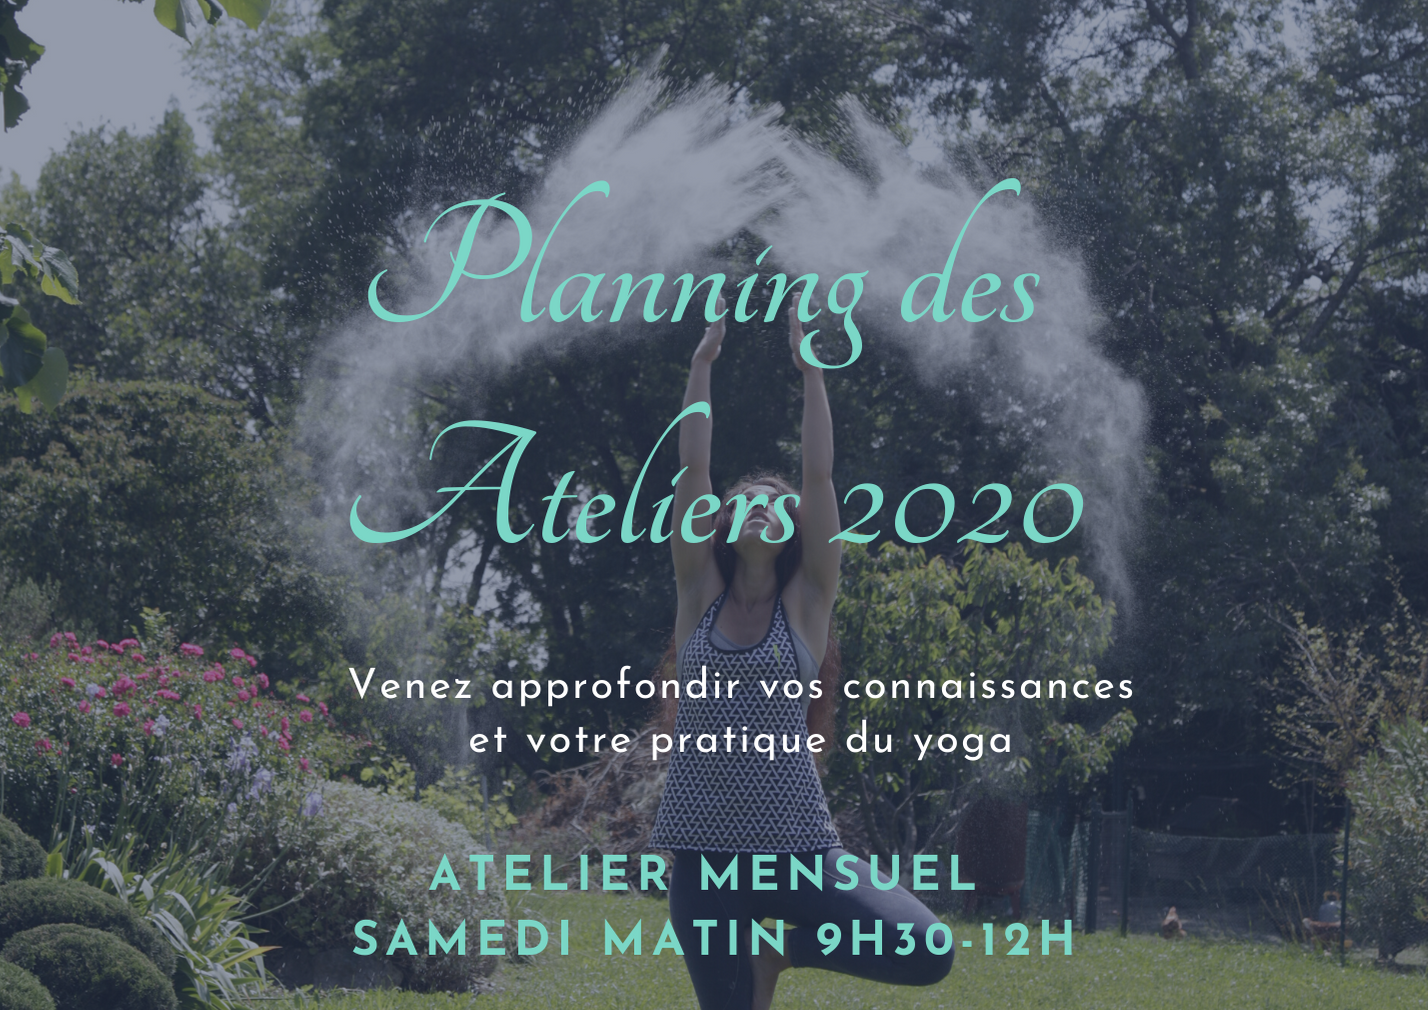 You are currently viewing Planning des ateliers de yoga 2020